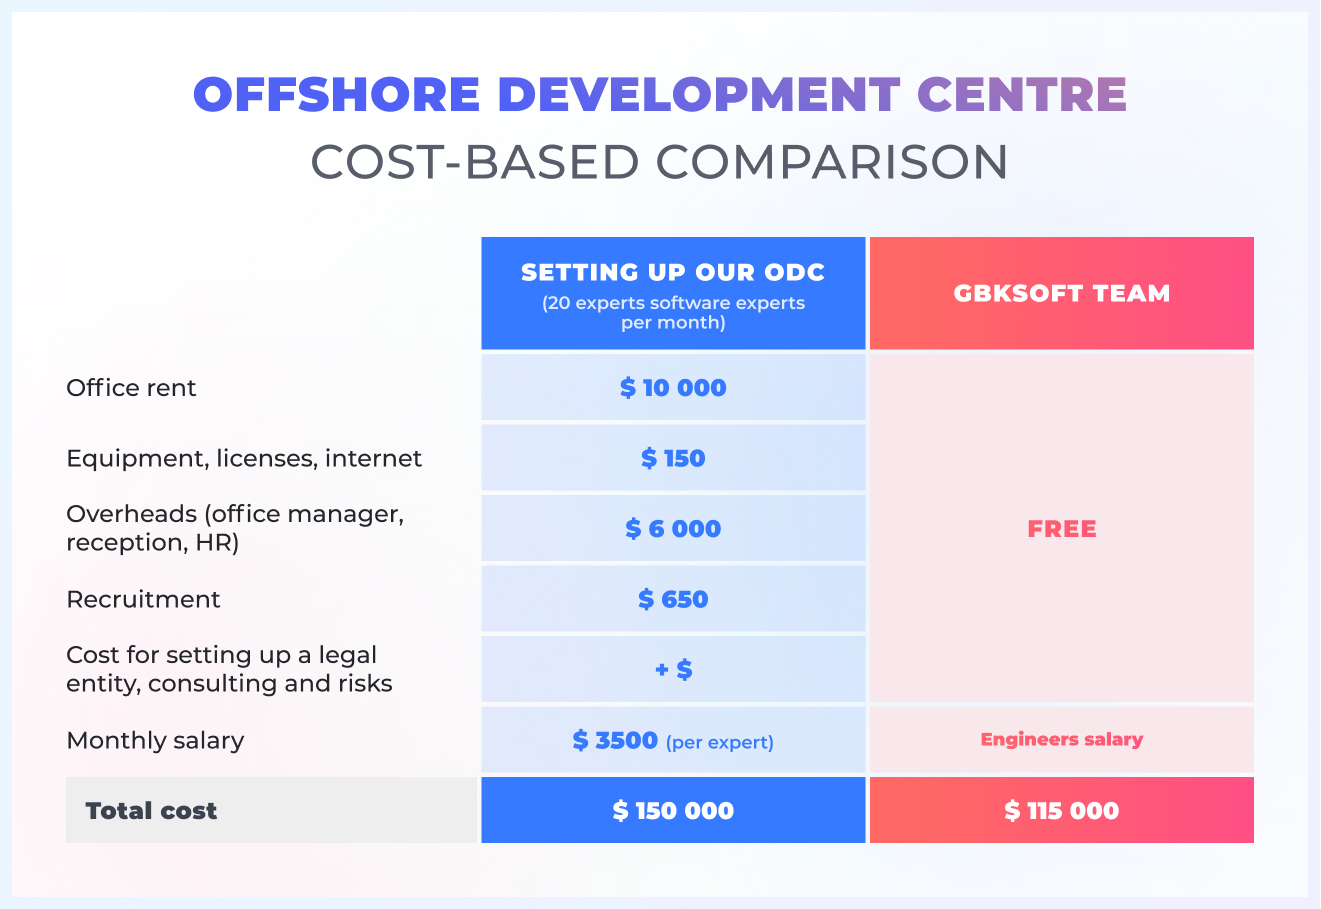 ODC and outsourcing to GBKSOFT comparison